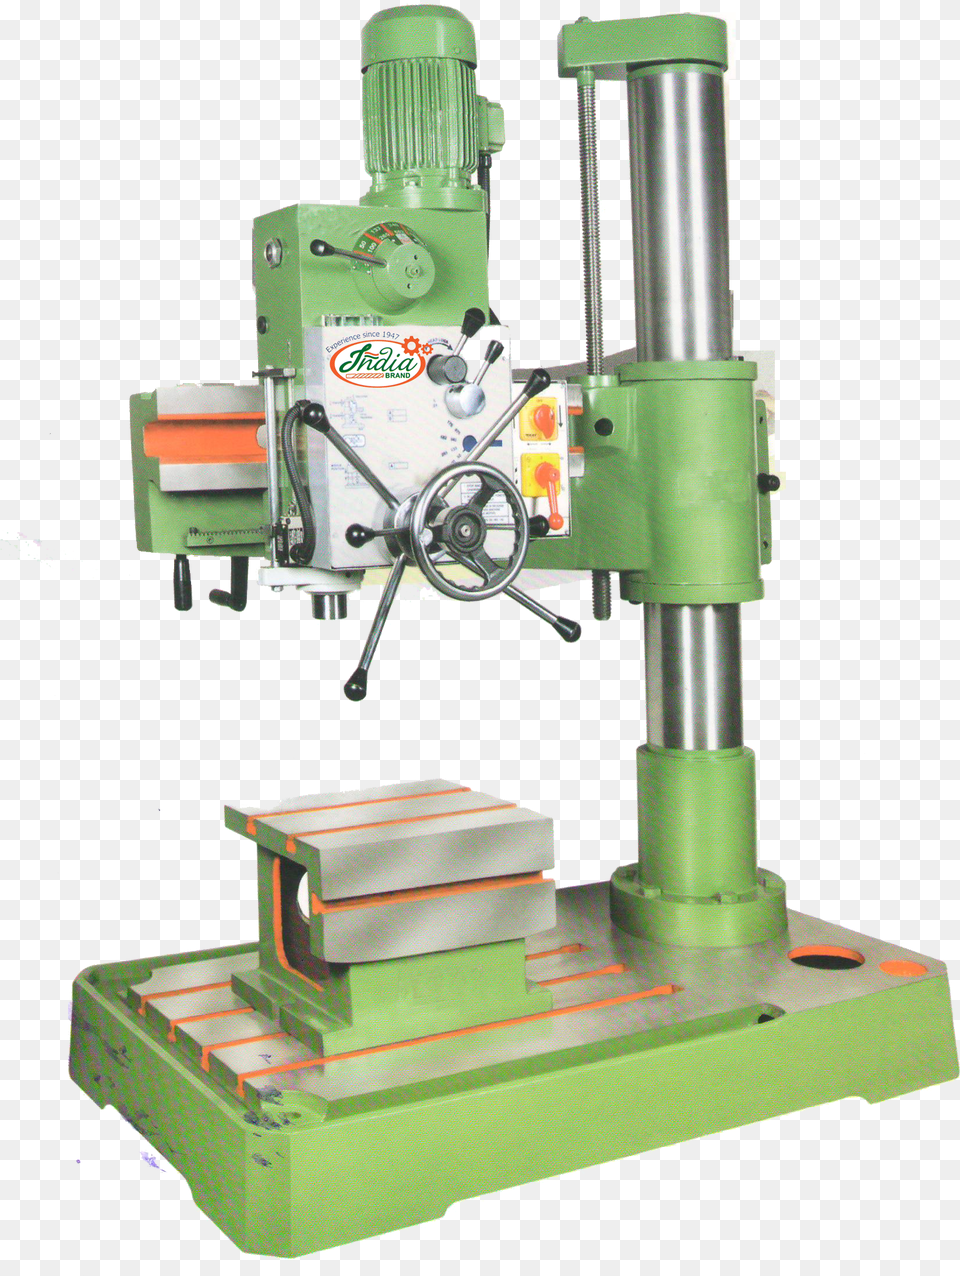 Radial Drill Machine, Toy, Wheel, Outdoors Png Image